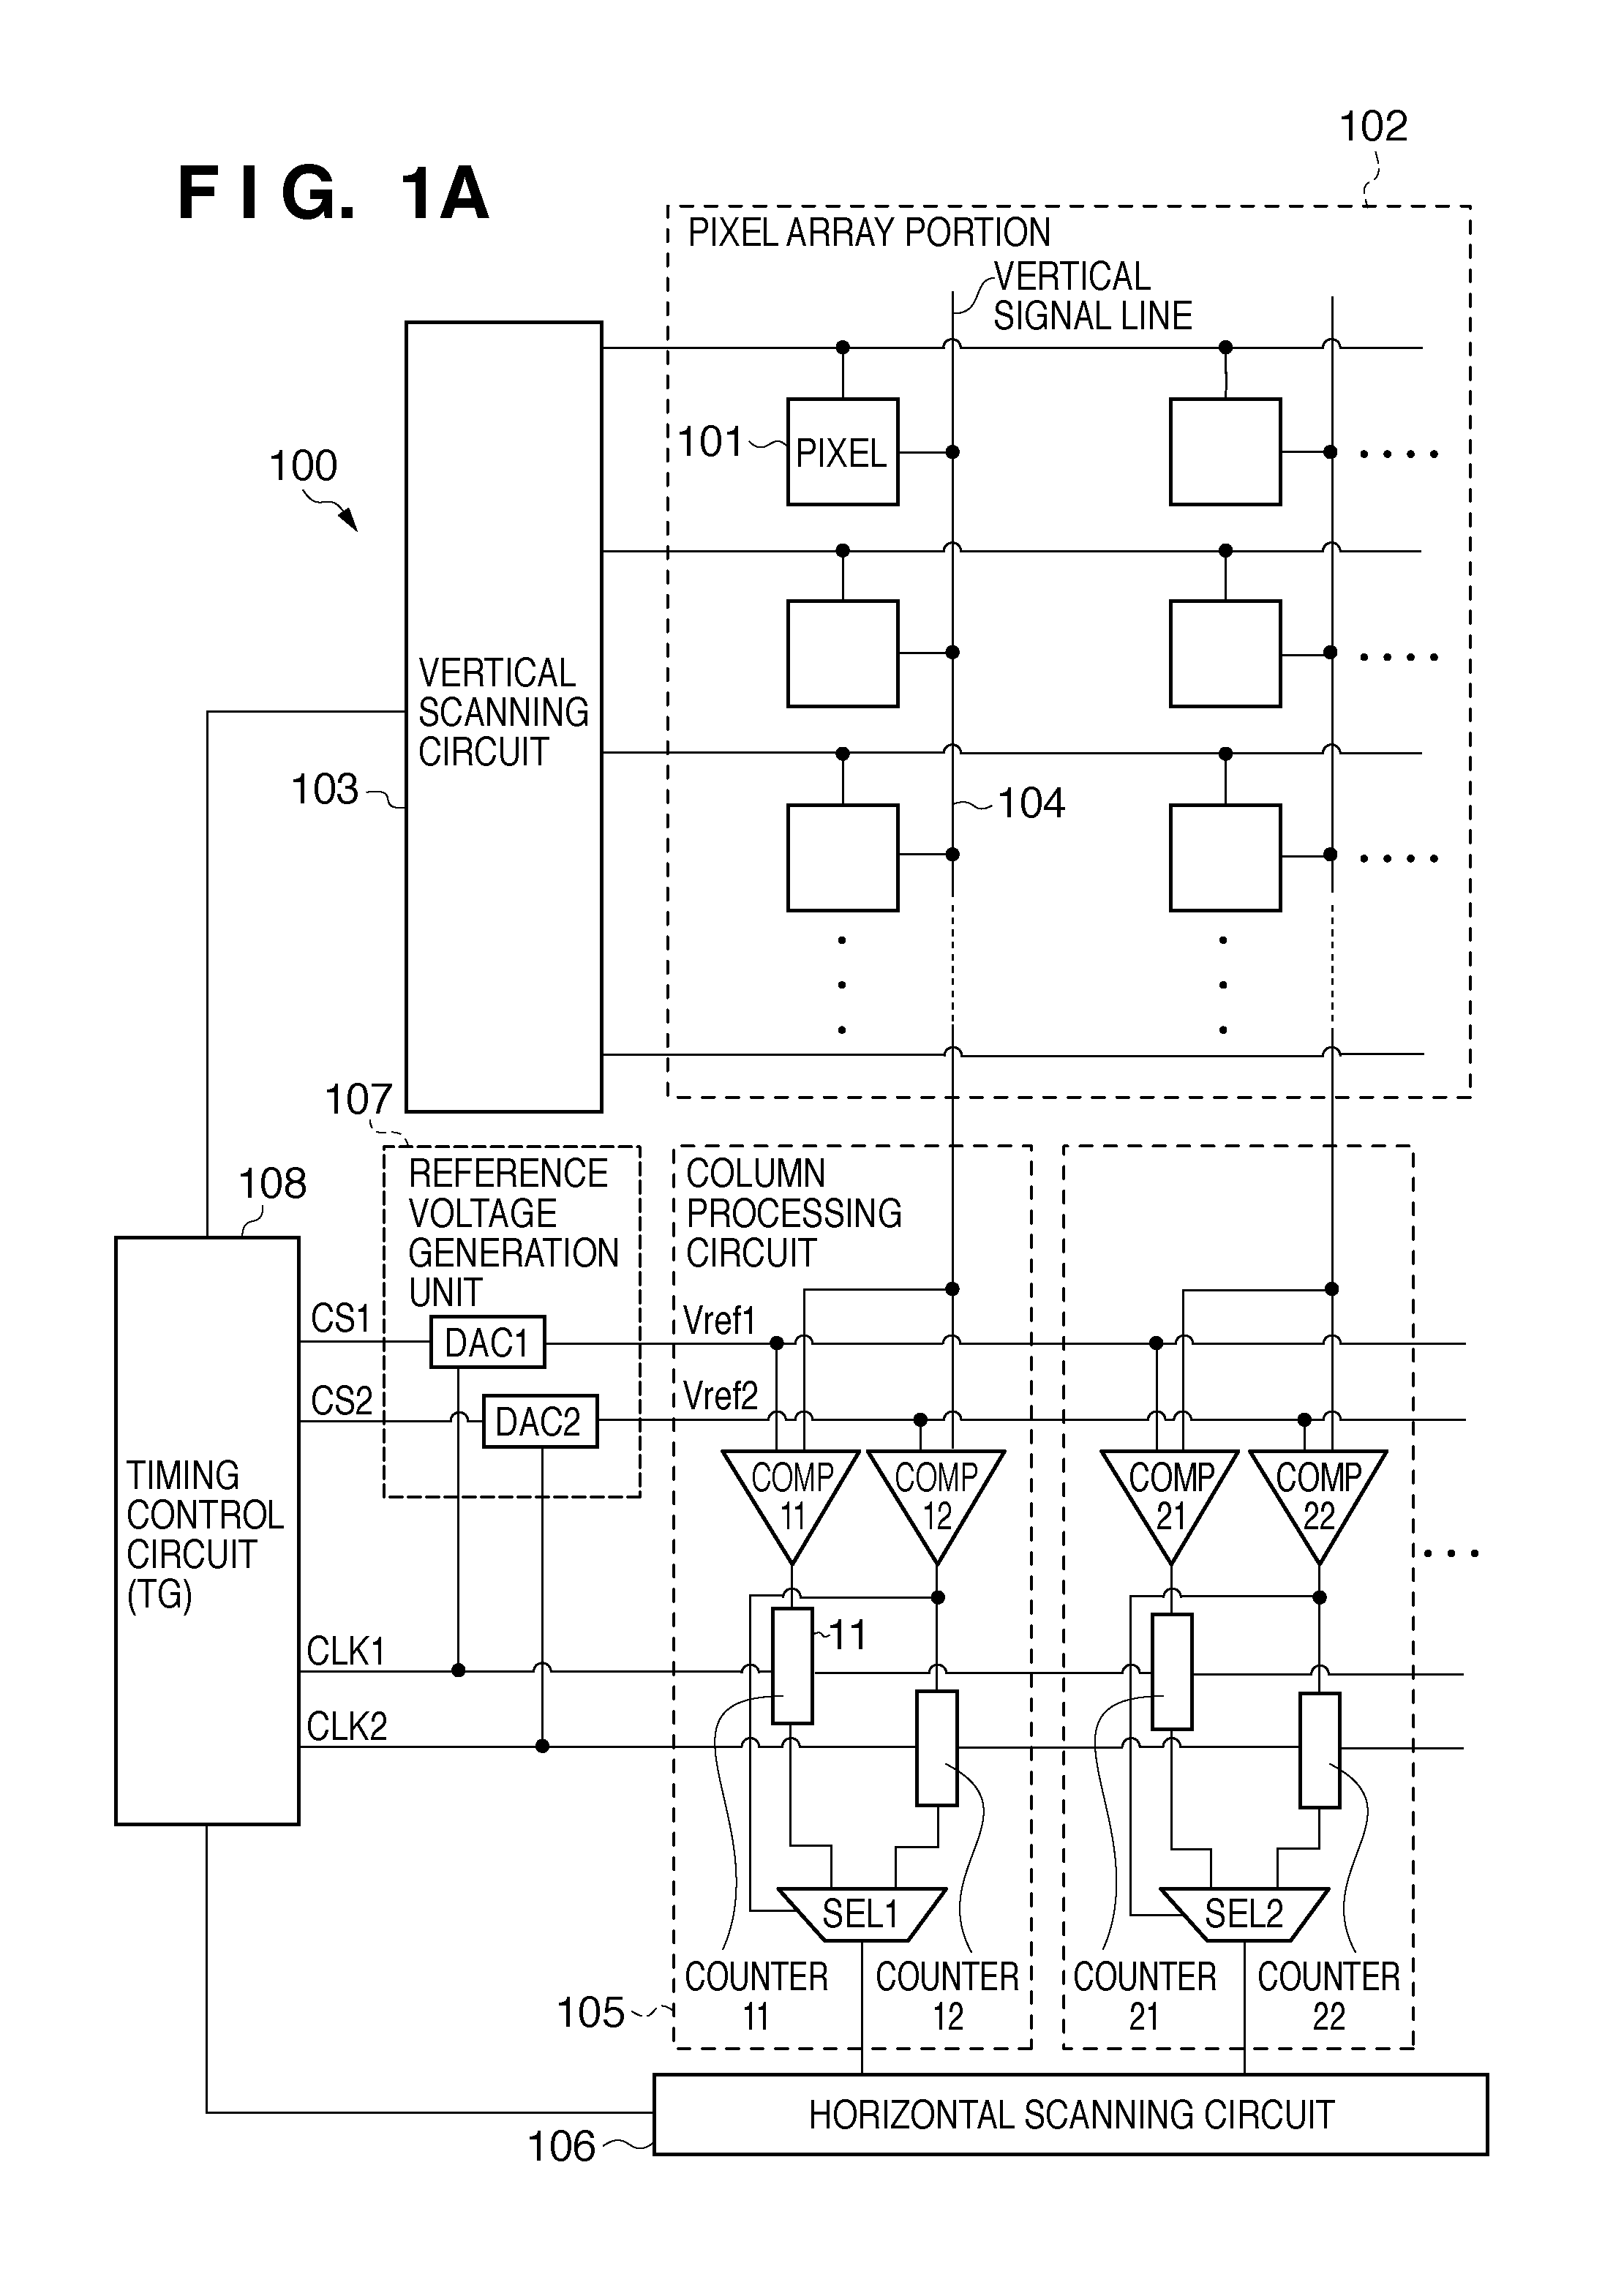 Solid-state image sensing element and image sensing system